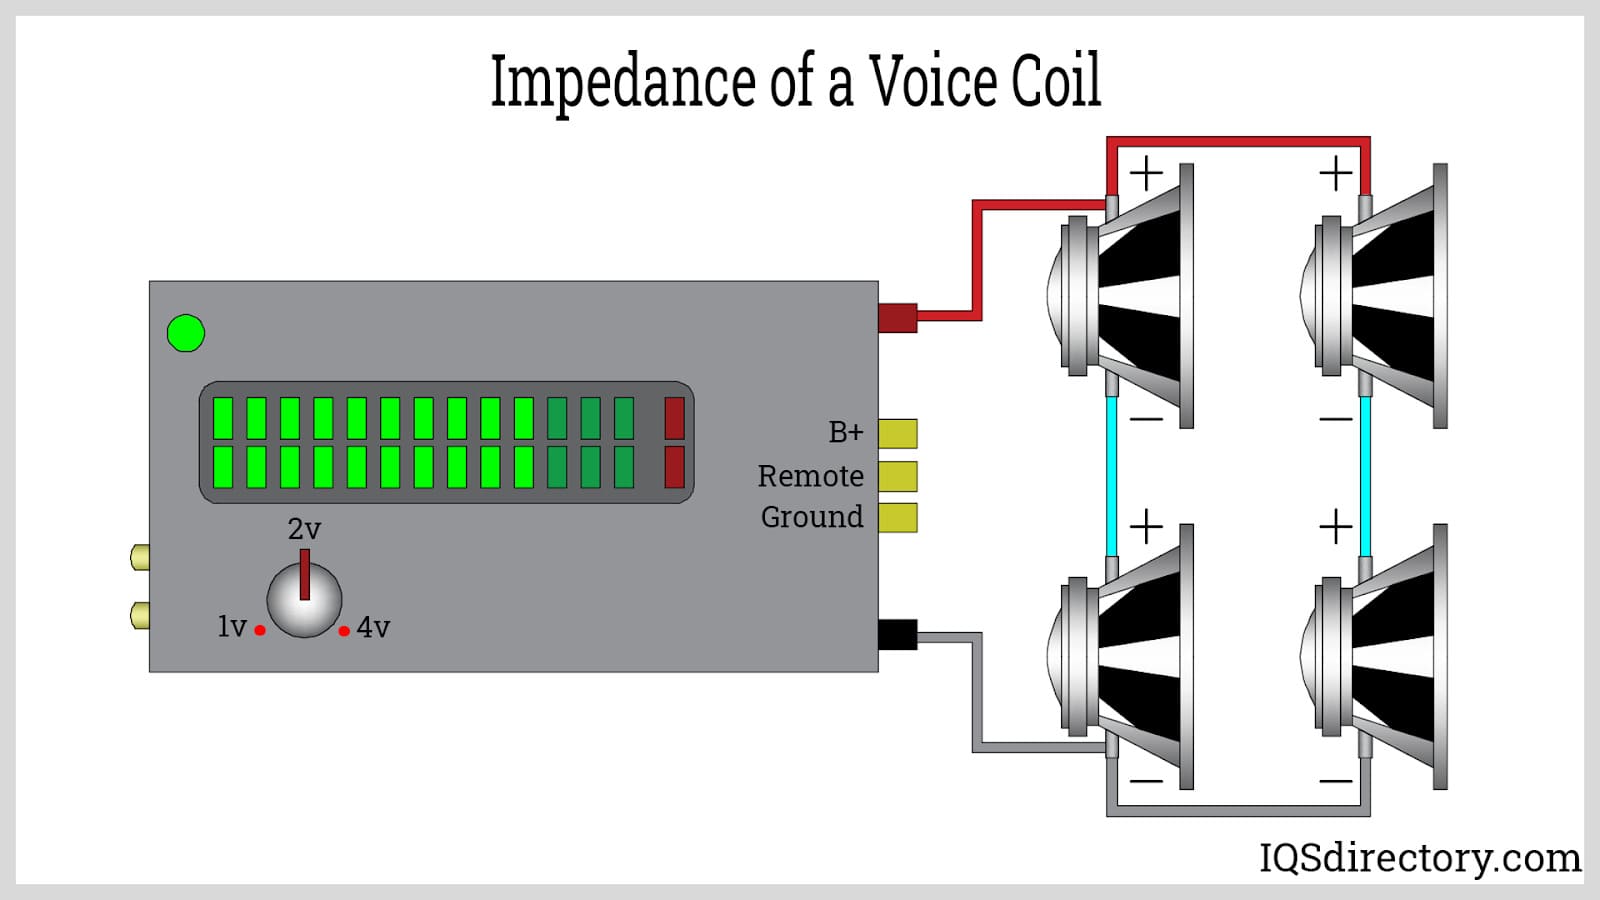 Impedance of a Voice Coil